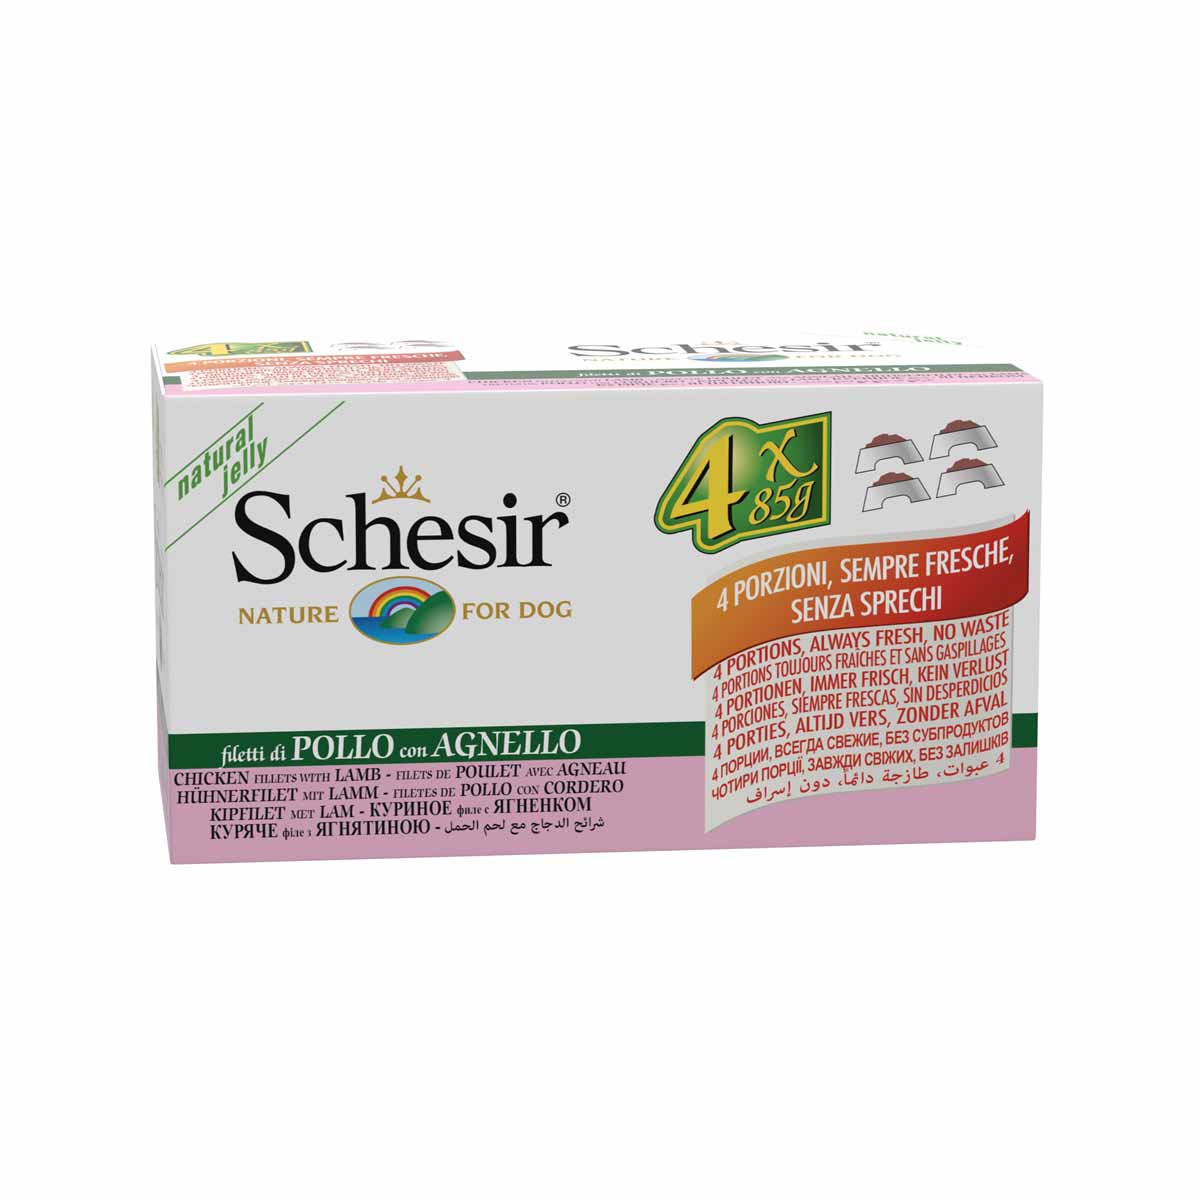 Linea Schesir Nature for Dog Country 4x85g